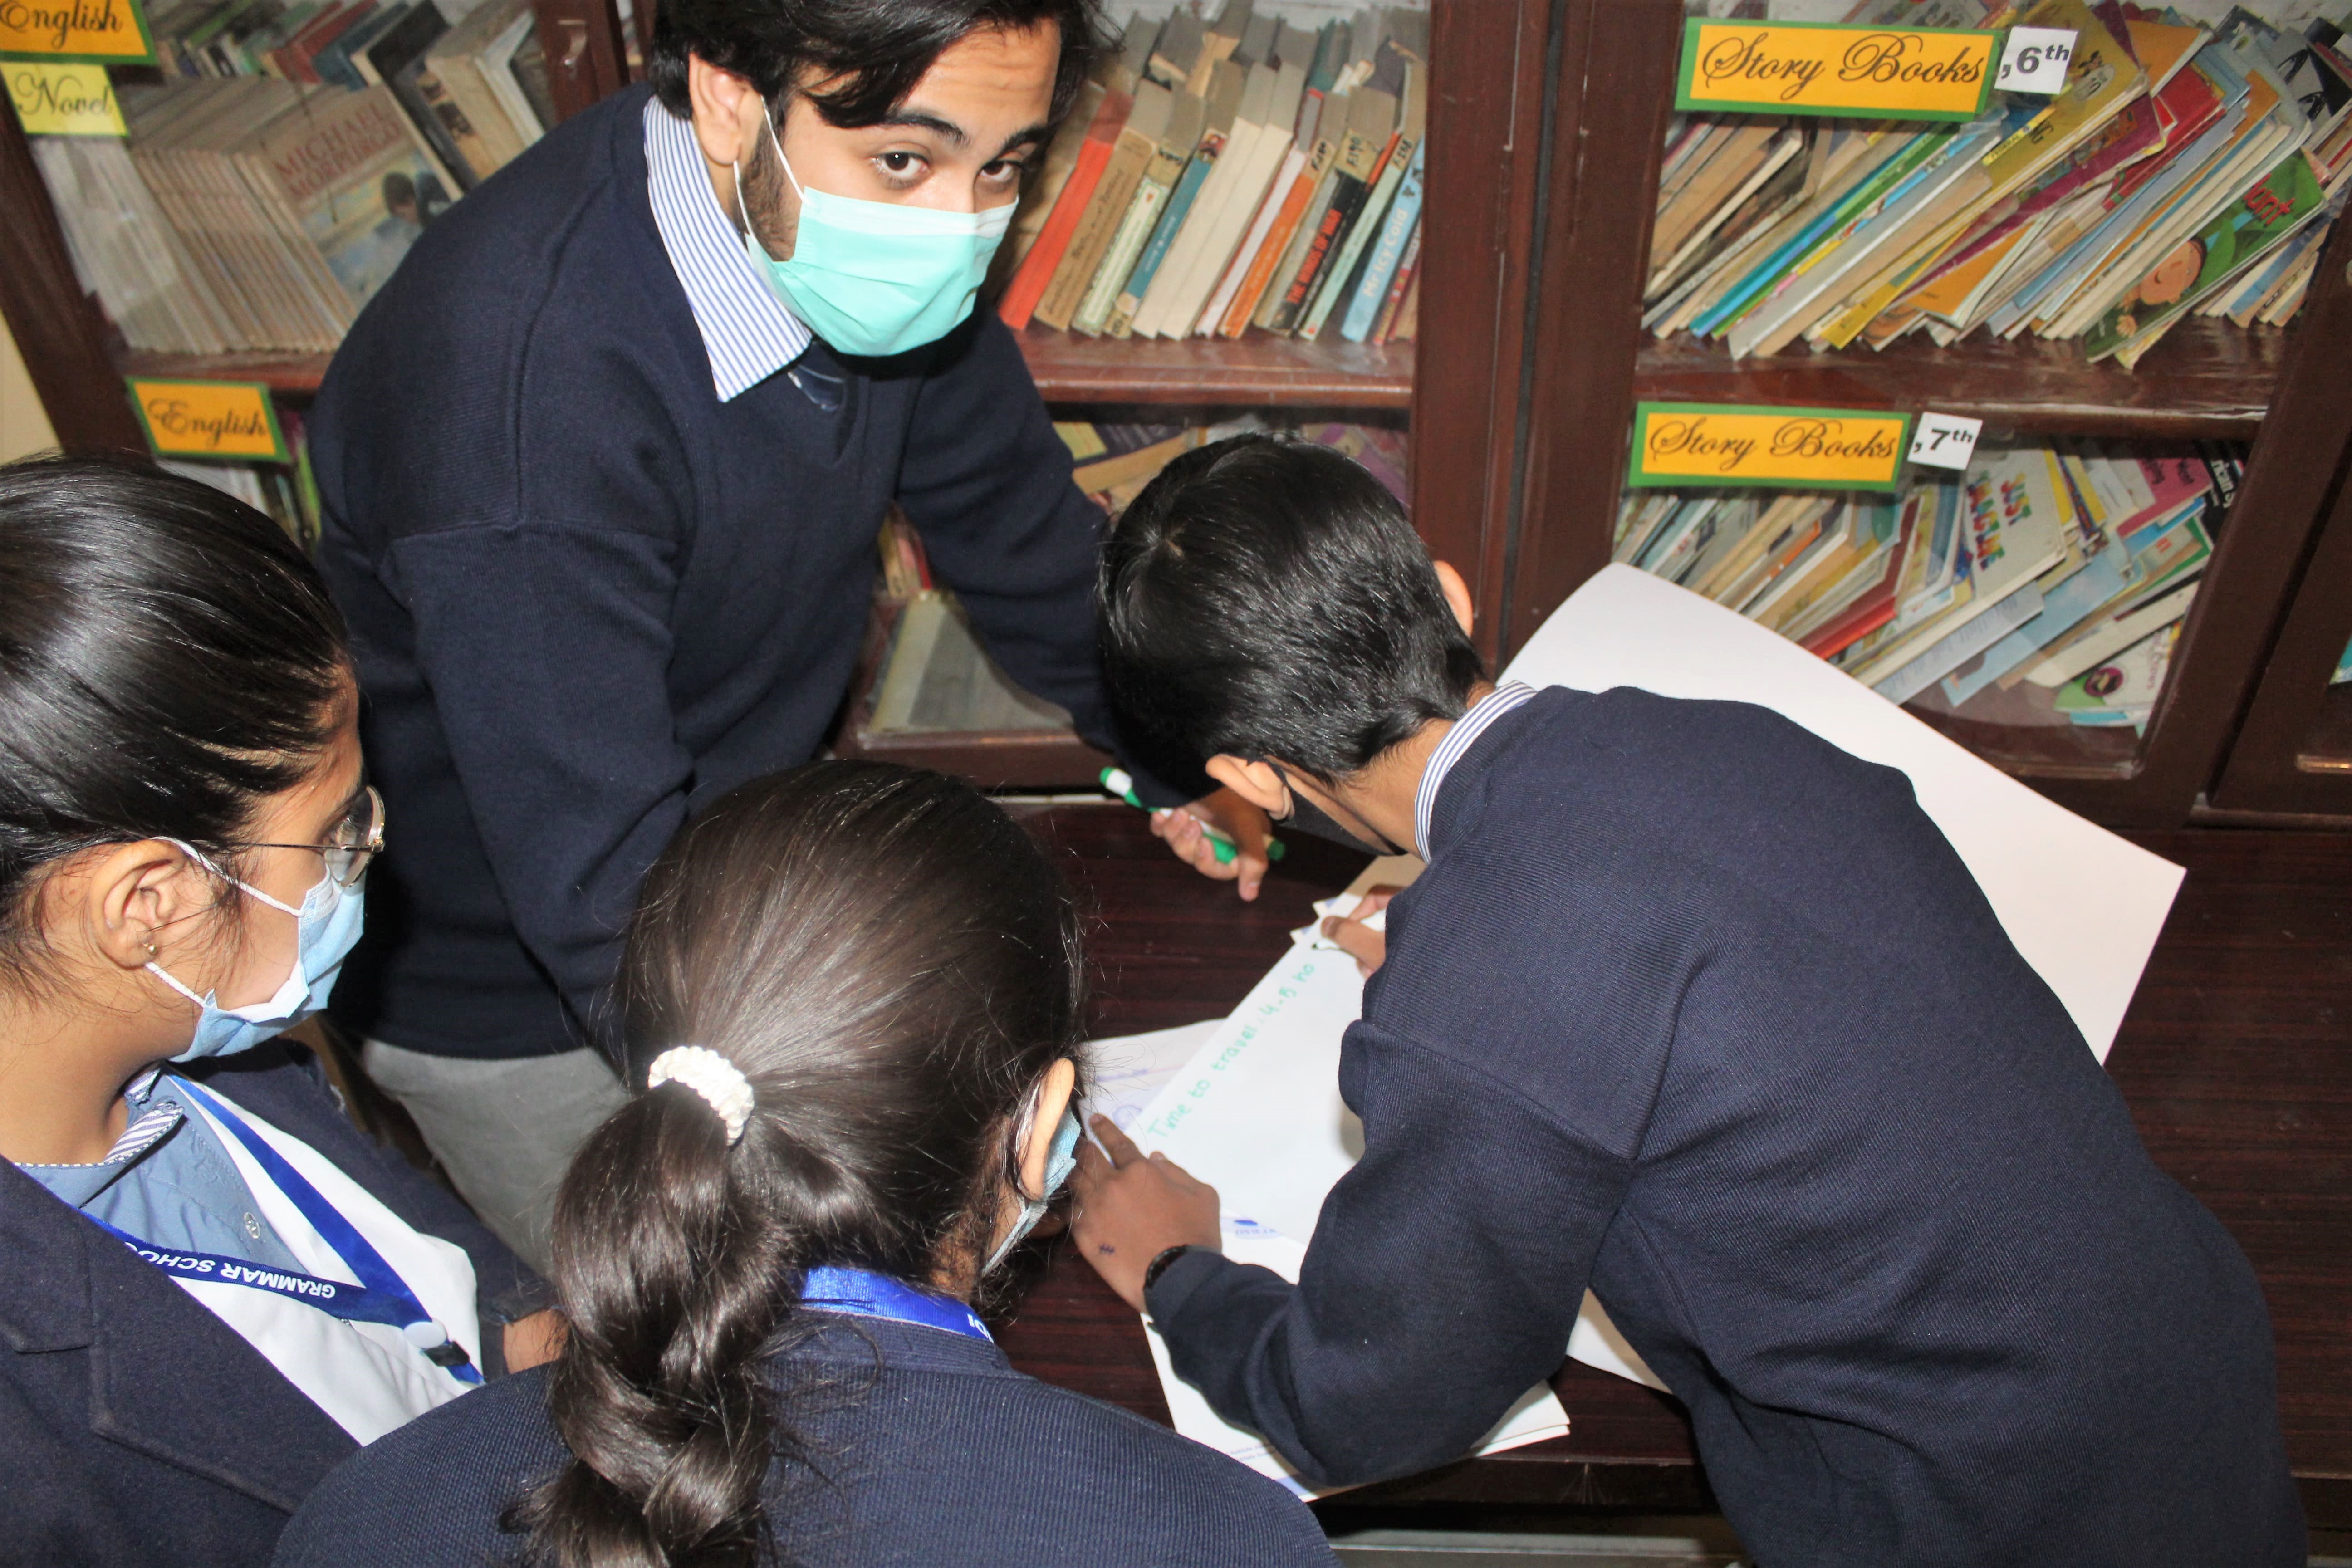 Students complete an activity